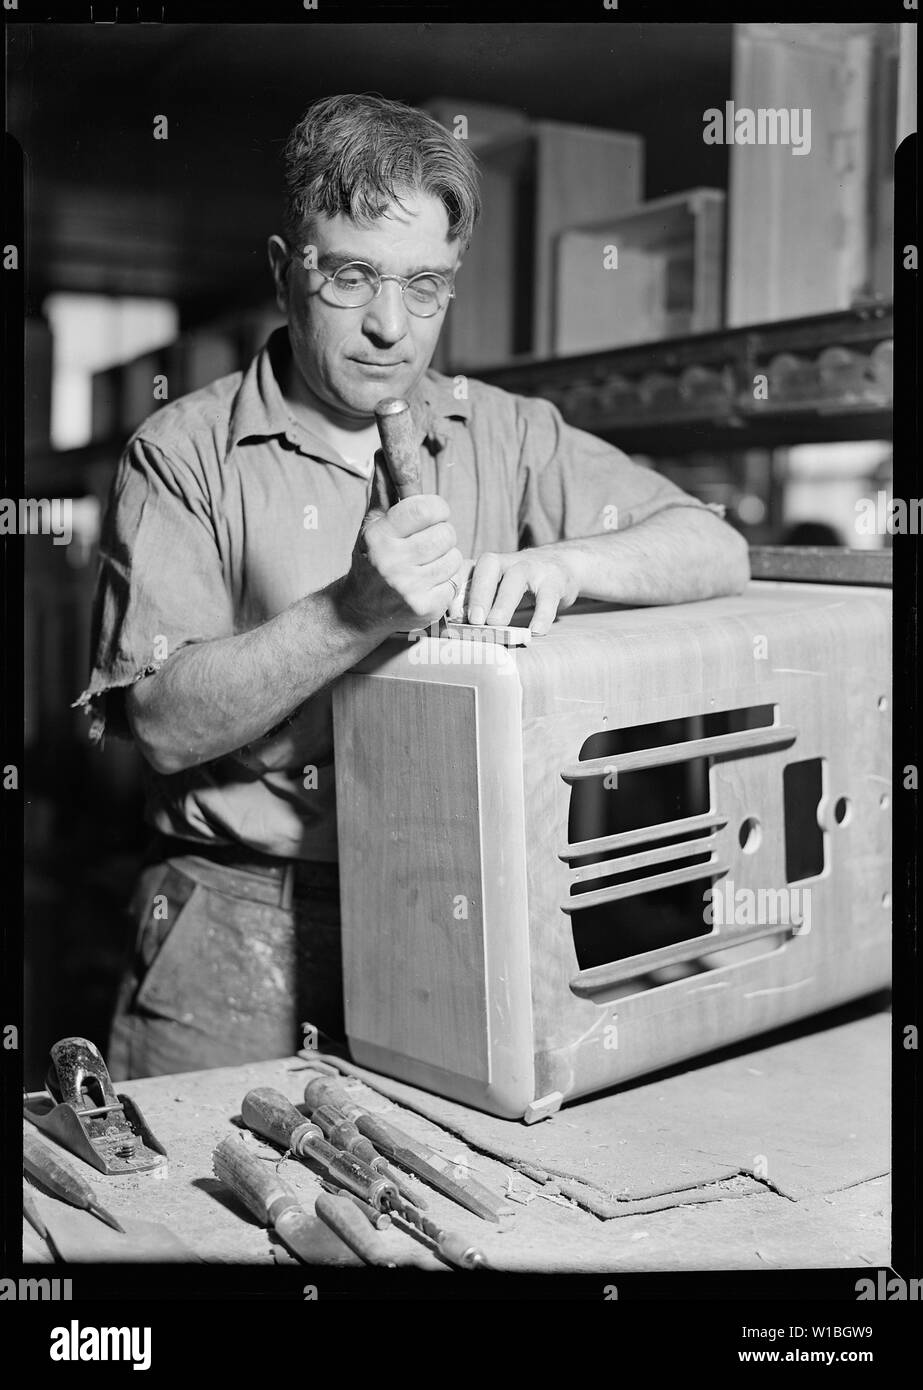 Camden, New Jersey - Cabinet making. RCA Victor. Cabinet repair man preparing to cut a piece of veneer - to replace a section of veneer damaged during the assembly of the cabinet. This is all hand work and the worker must be a skilled, experiences cabinet-maker. Stock Photo